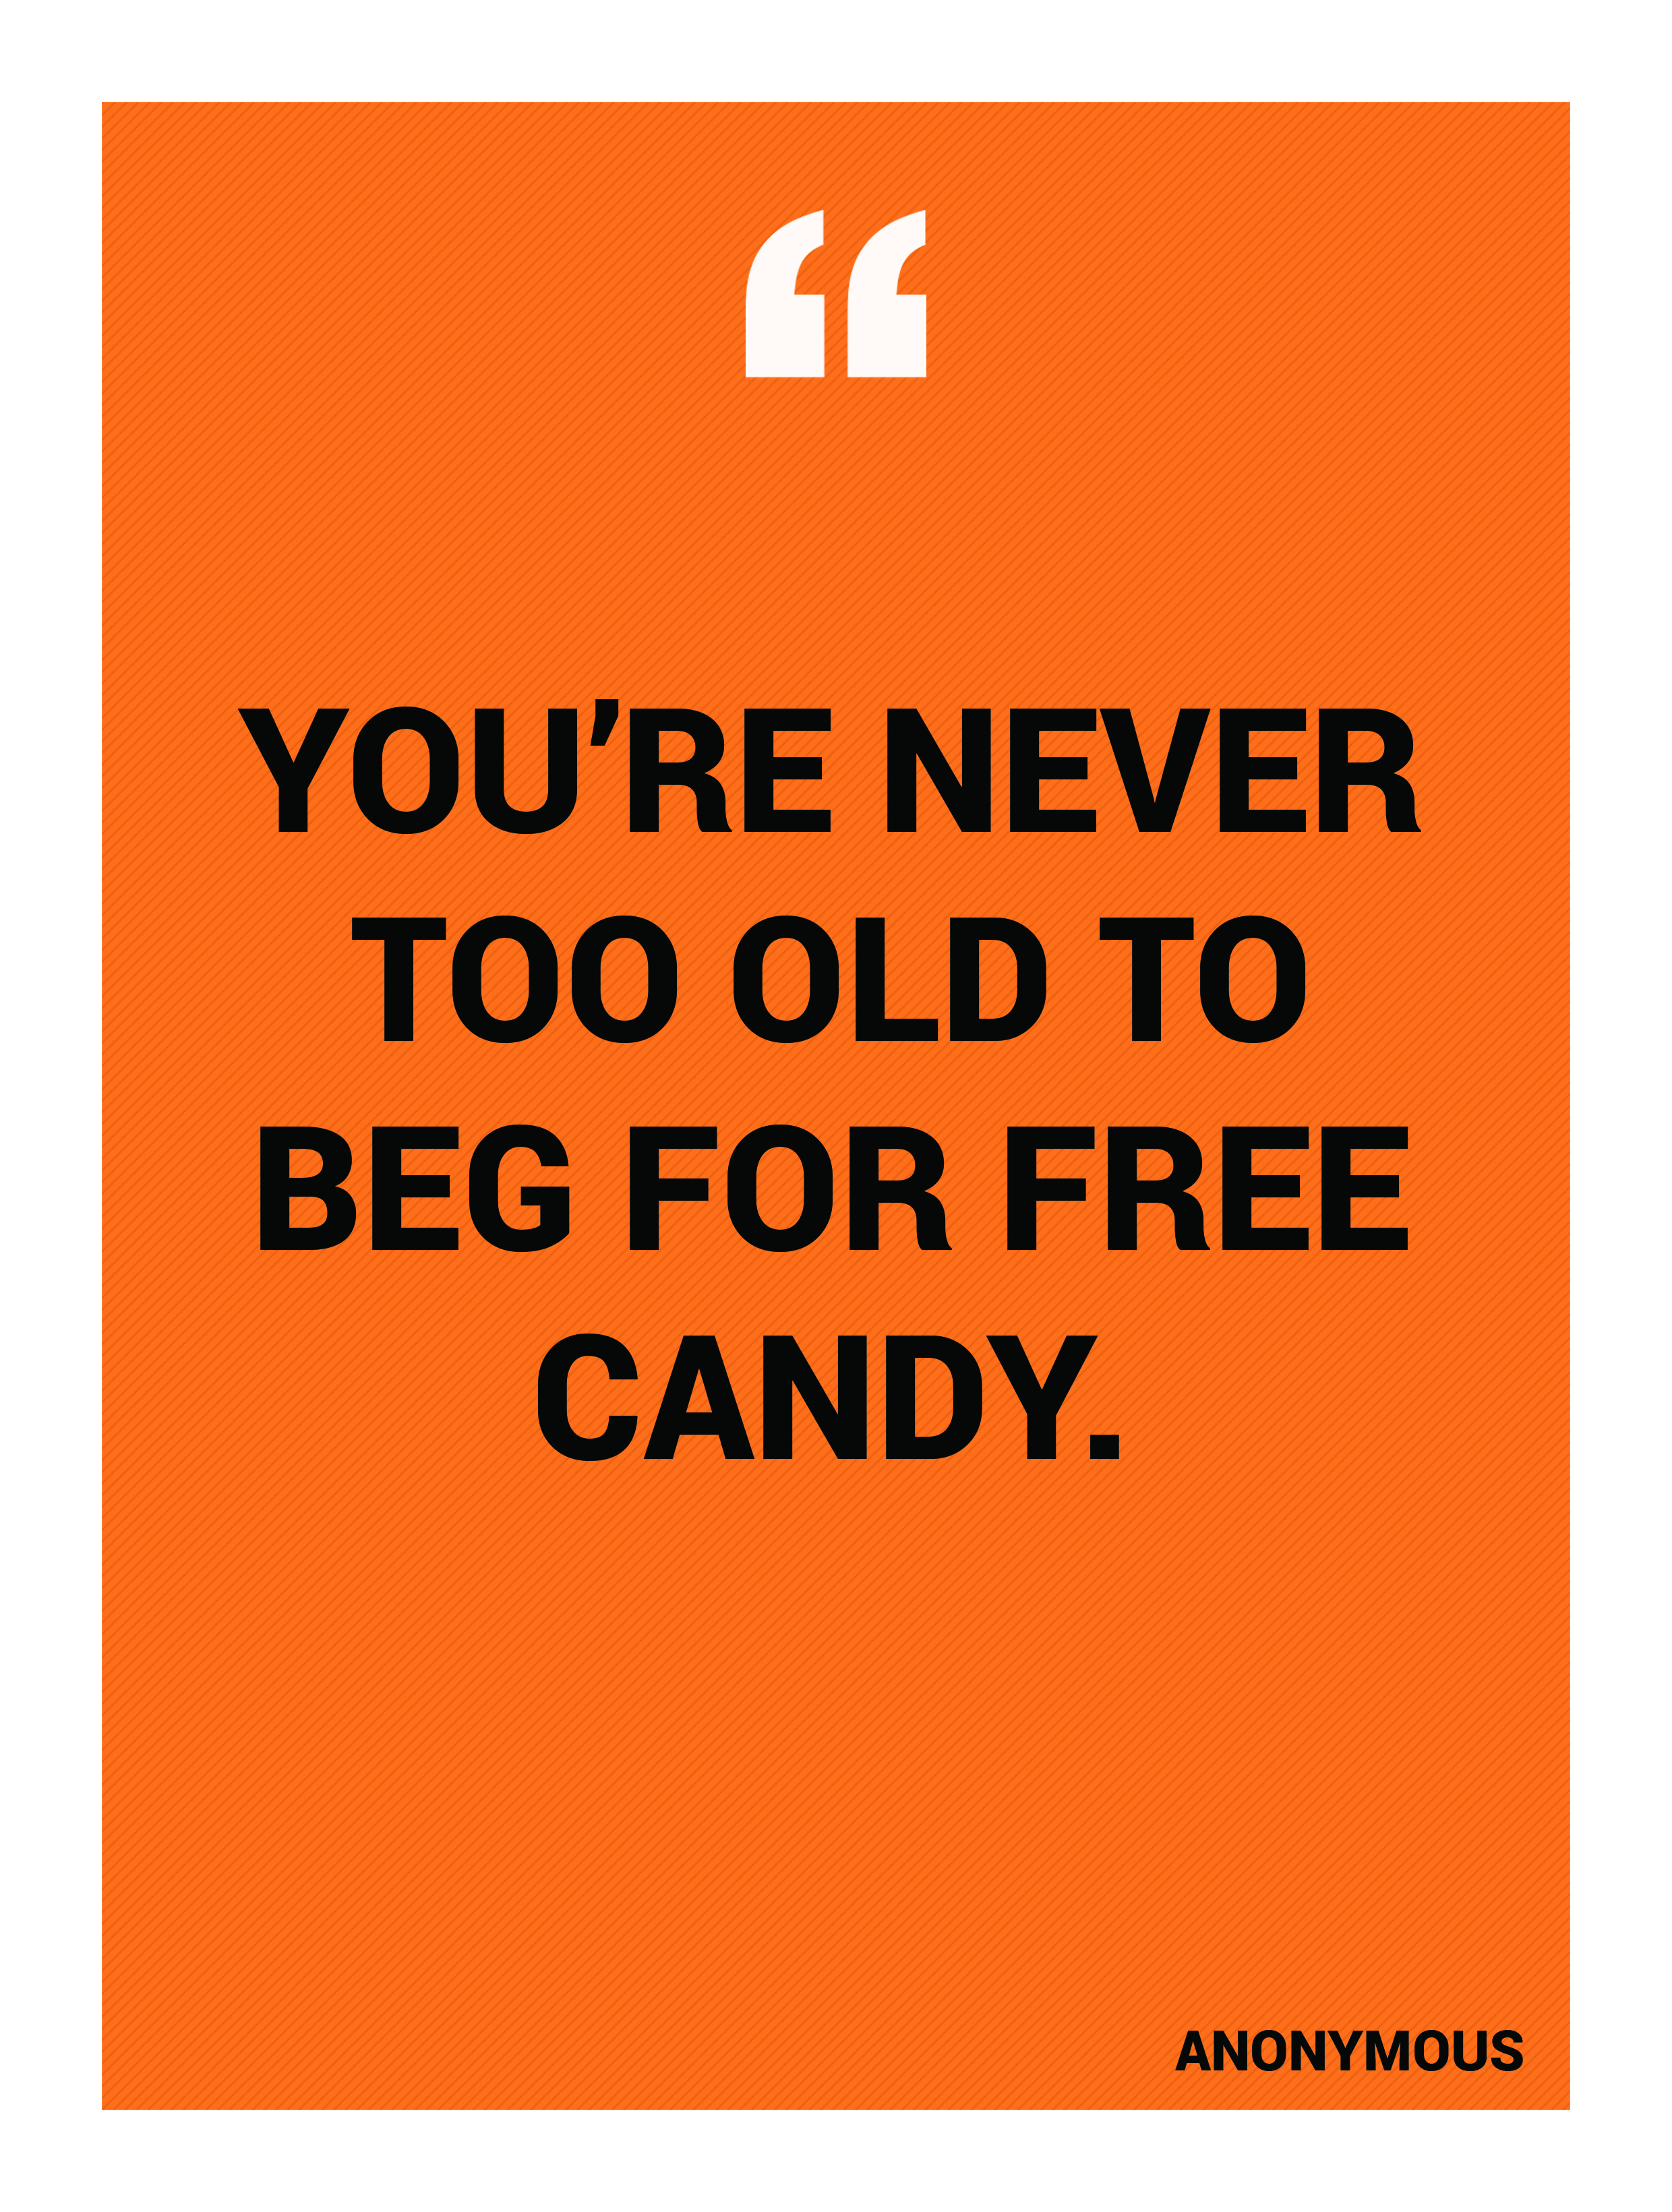 “You’re never too old to beg for free candy.” -Anonymous